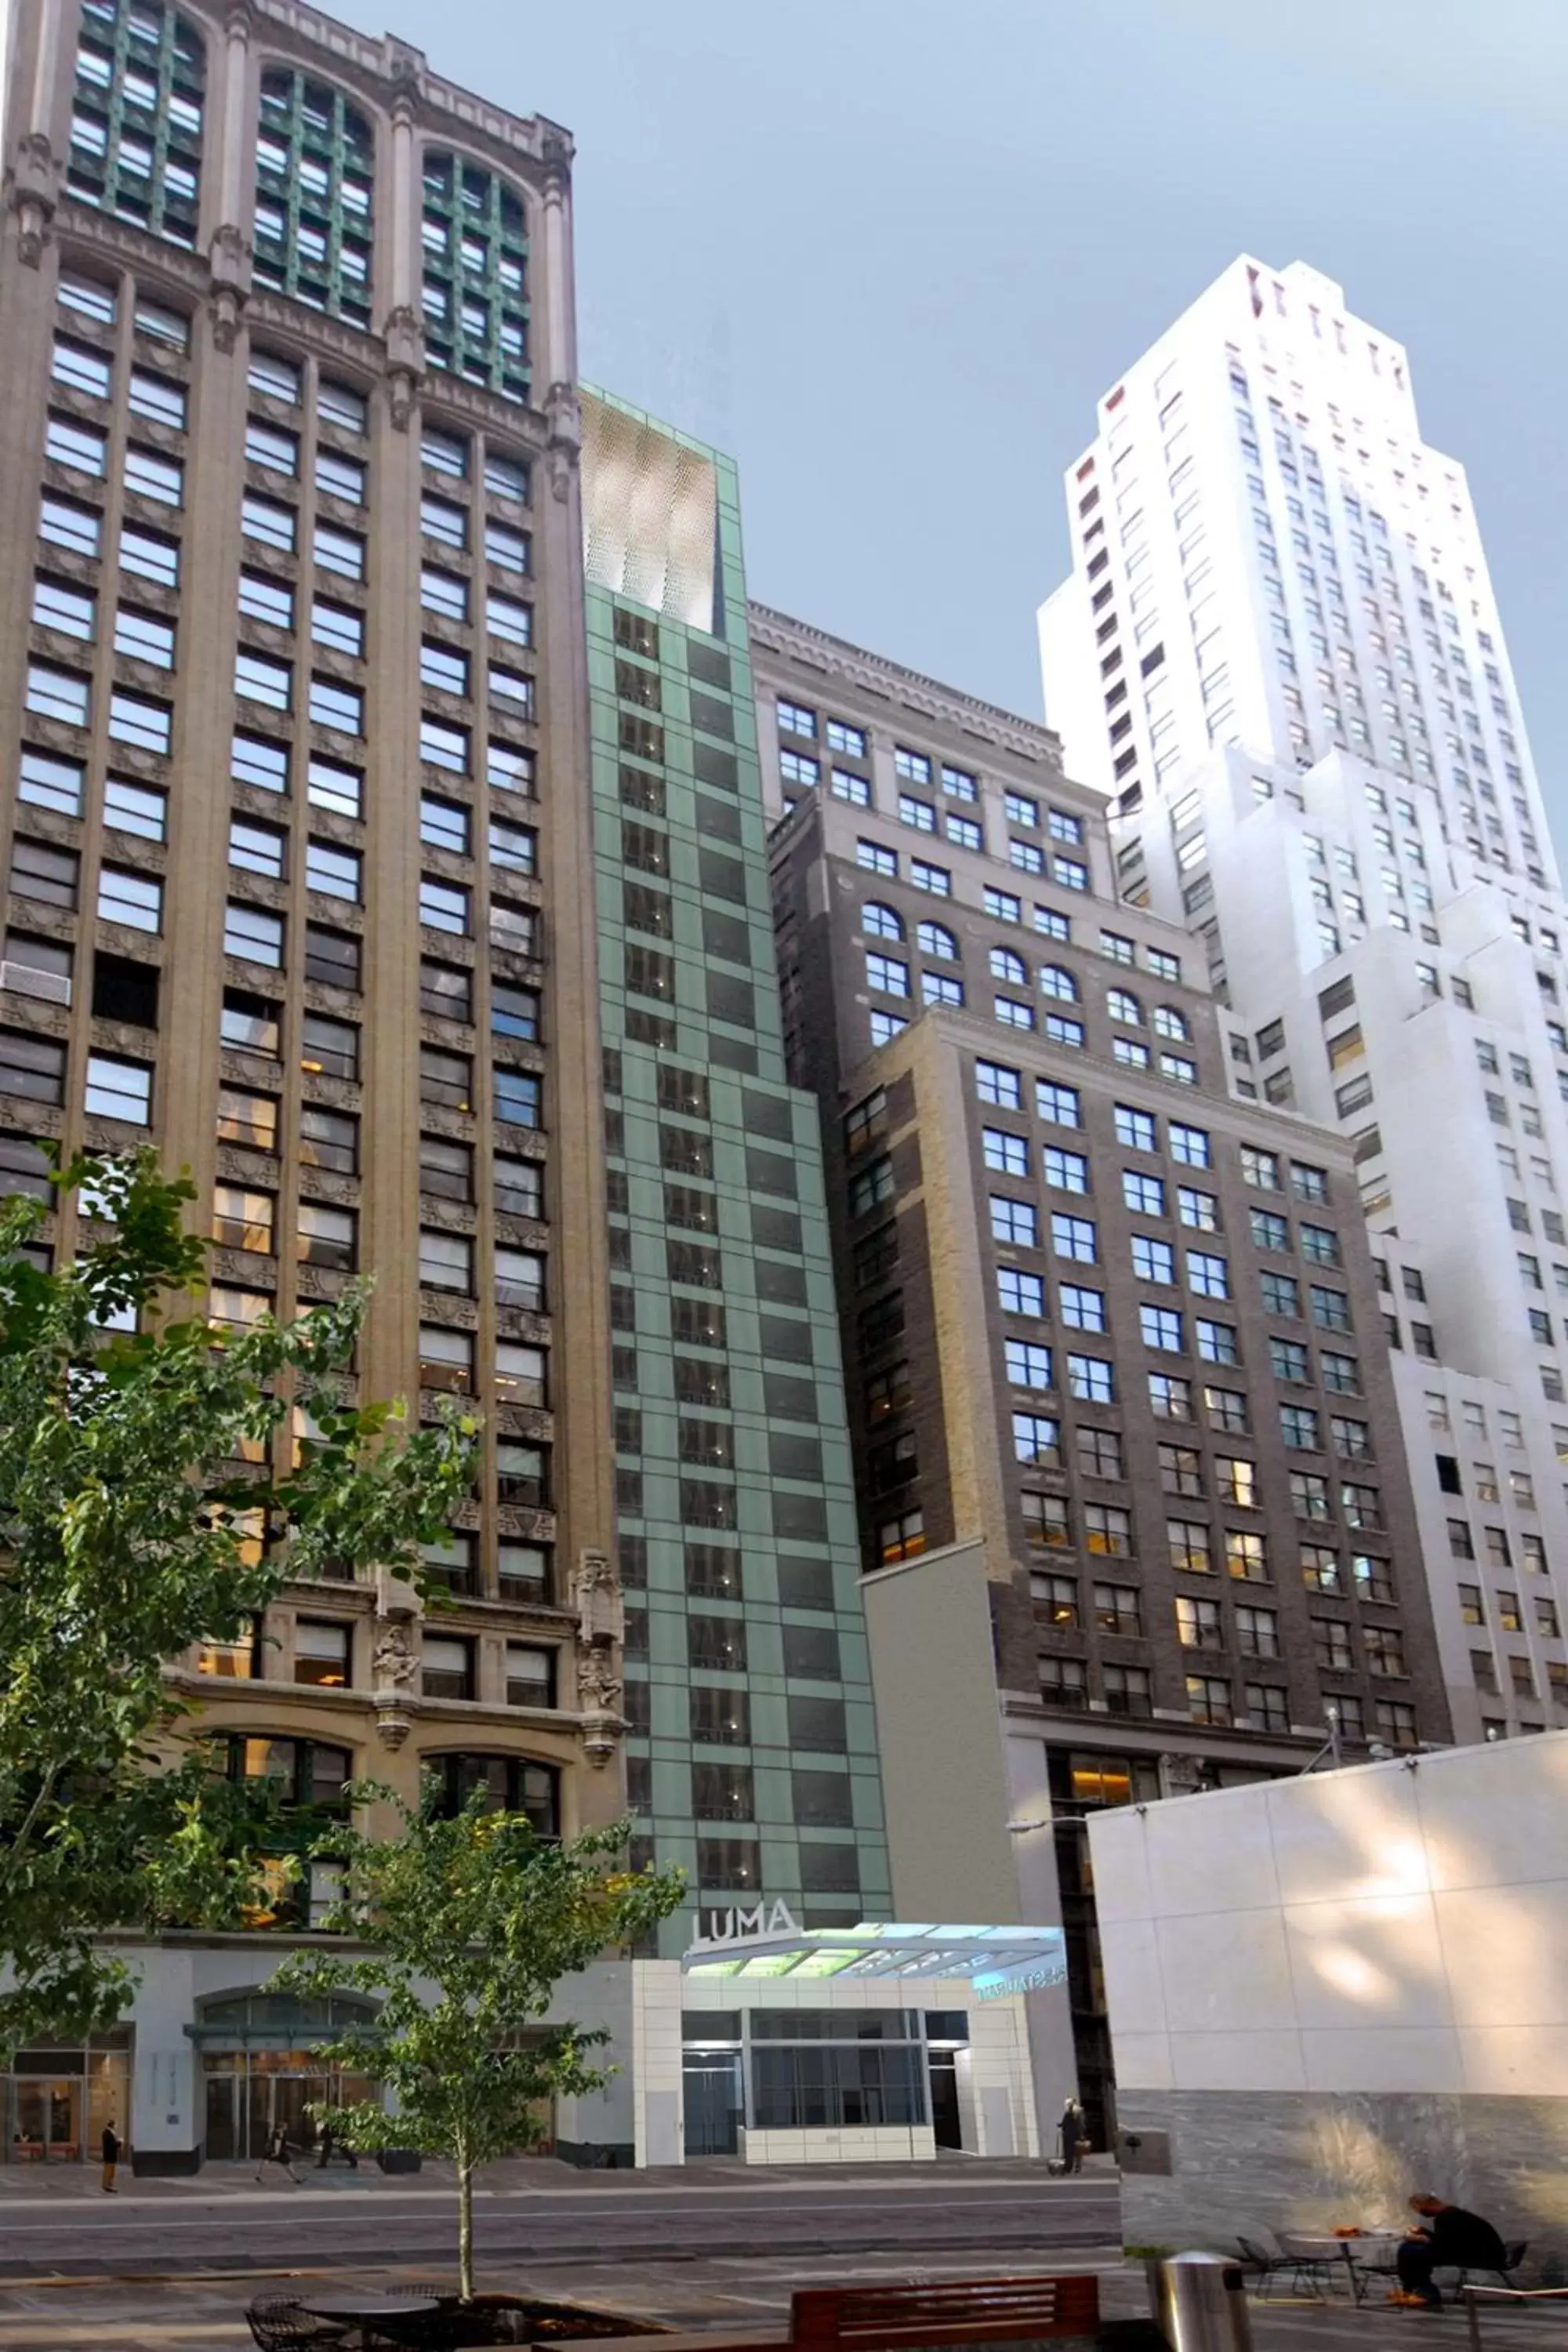 Property Building in LUMA Hotel - Times Square